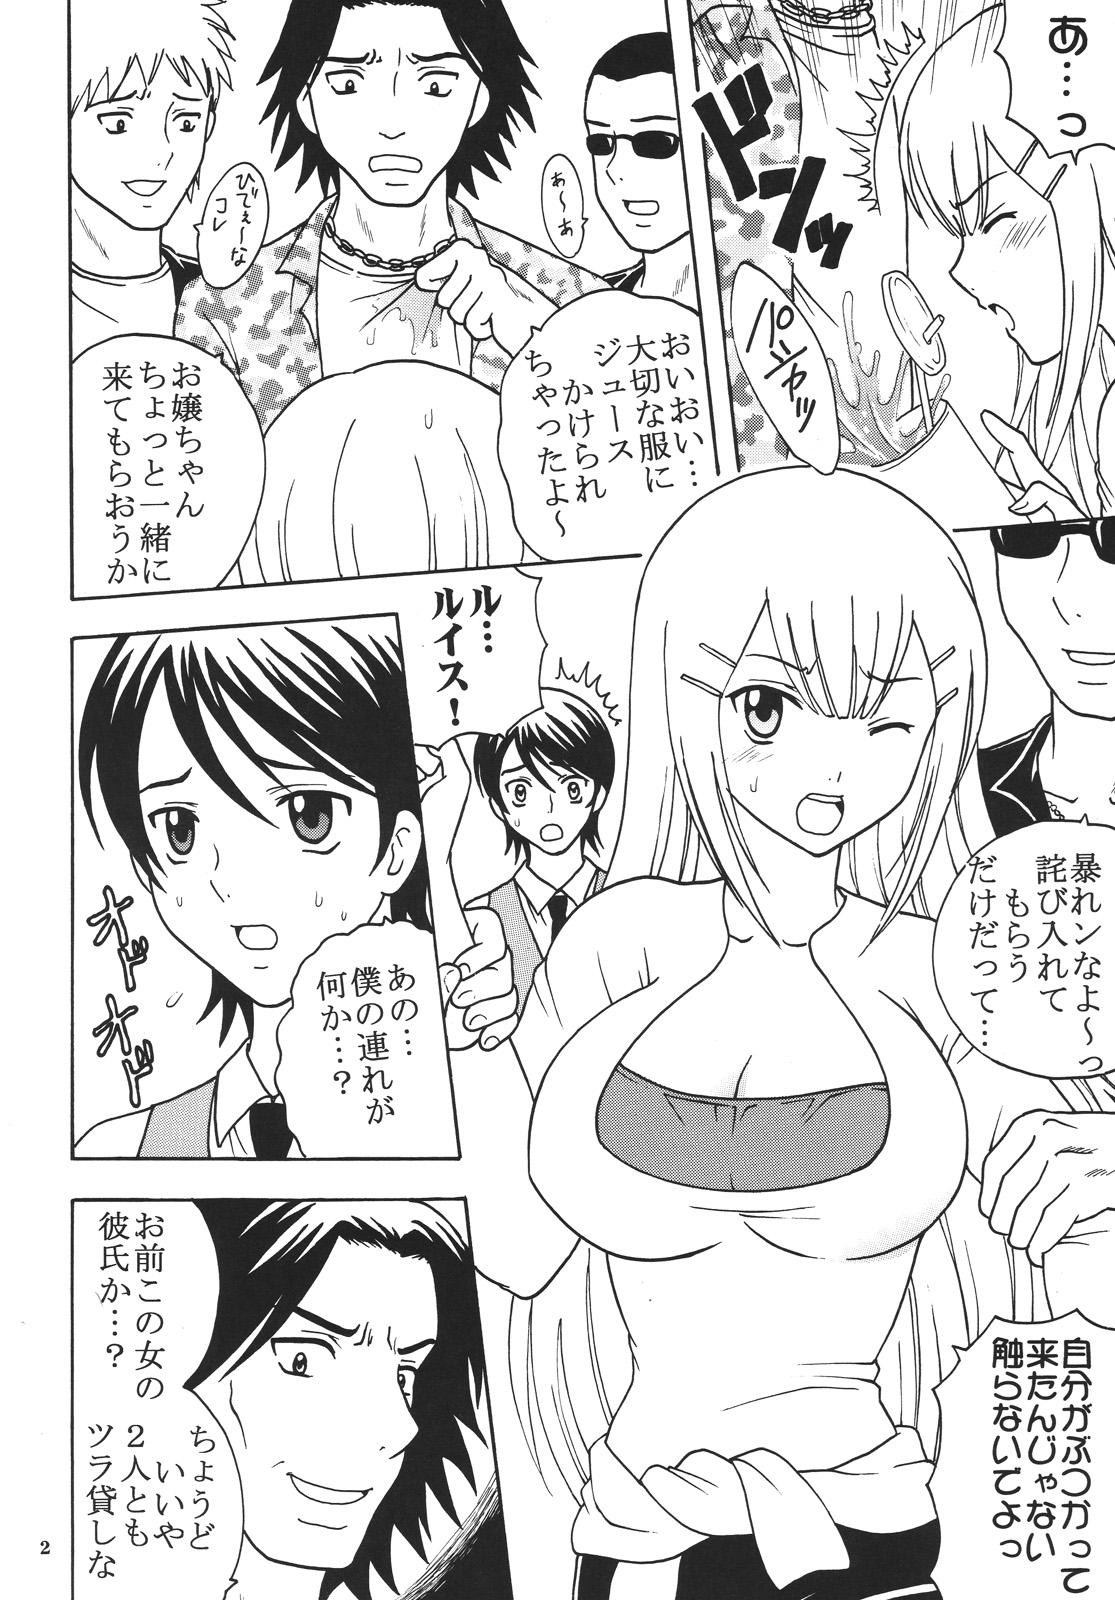 Blondes COSMIC BREED 00 - Gundam 00 Chica - Page 3